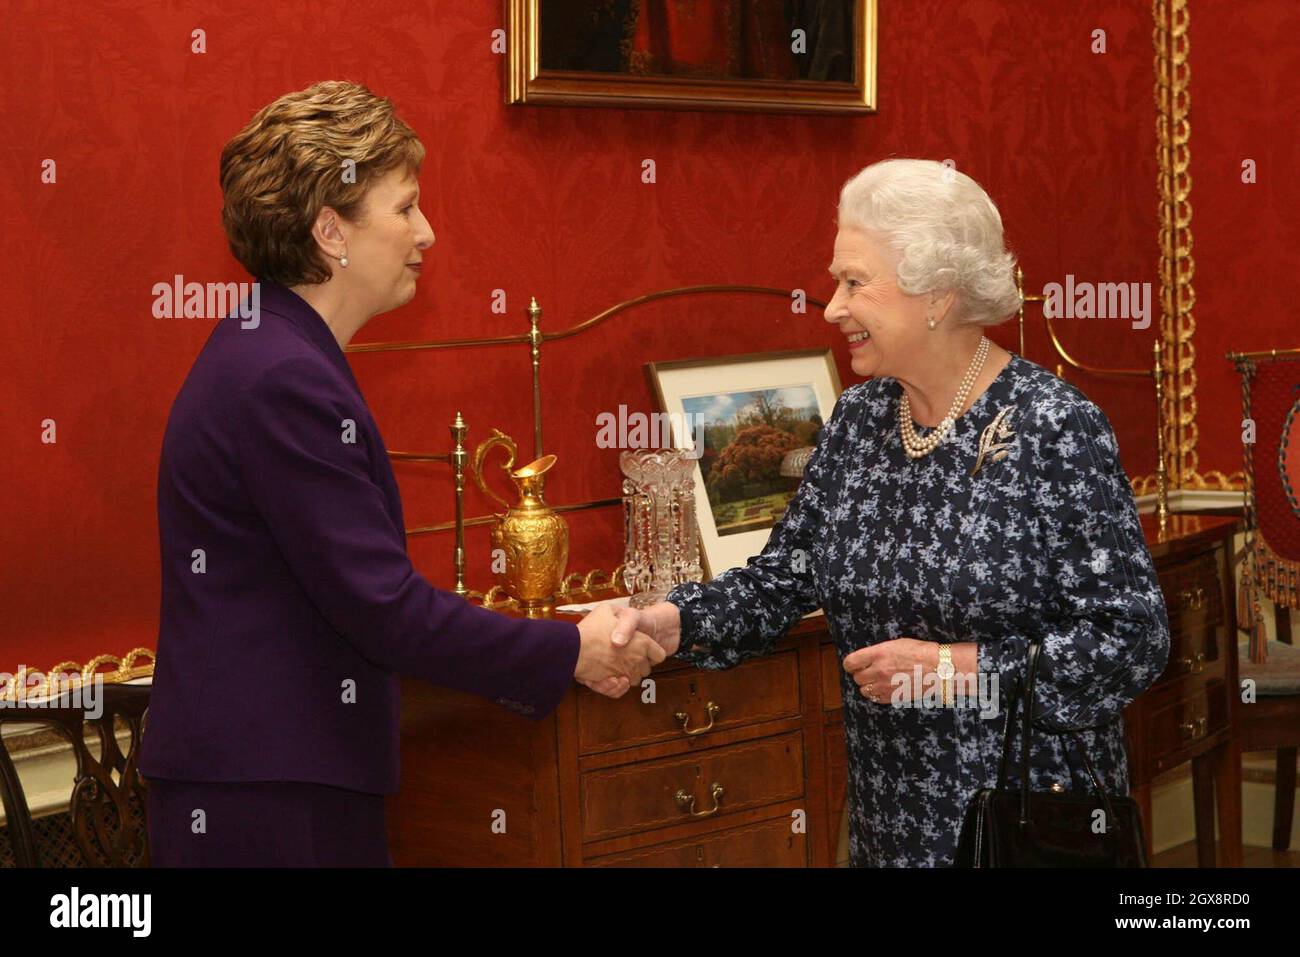 Queen Elizabeth II greets Irish President Mary McAleese at Hillsborough Castle, Belfast. It is the Queen's first visit to Northern Ireland since February 2003. Anwar Hussein/allactiondigital.com Stock Photo